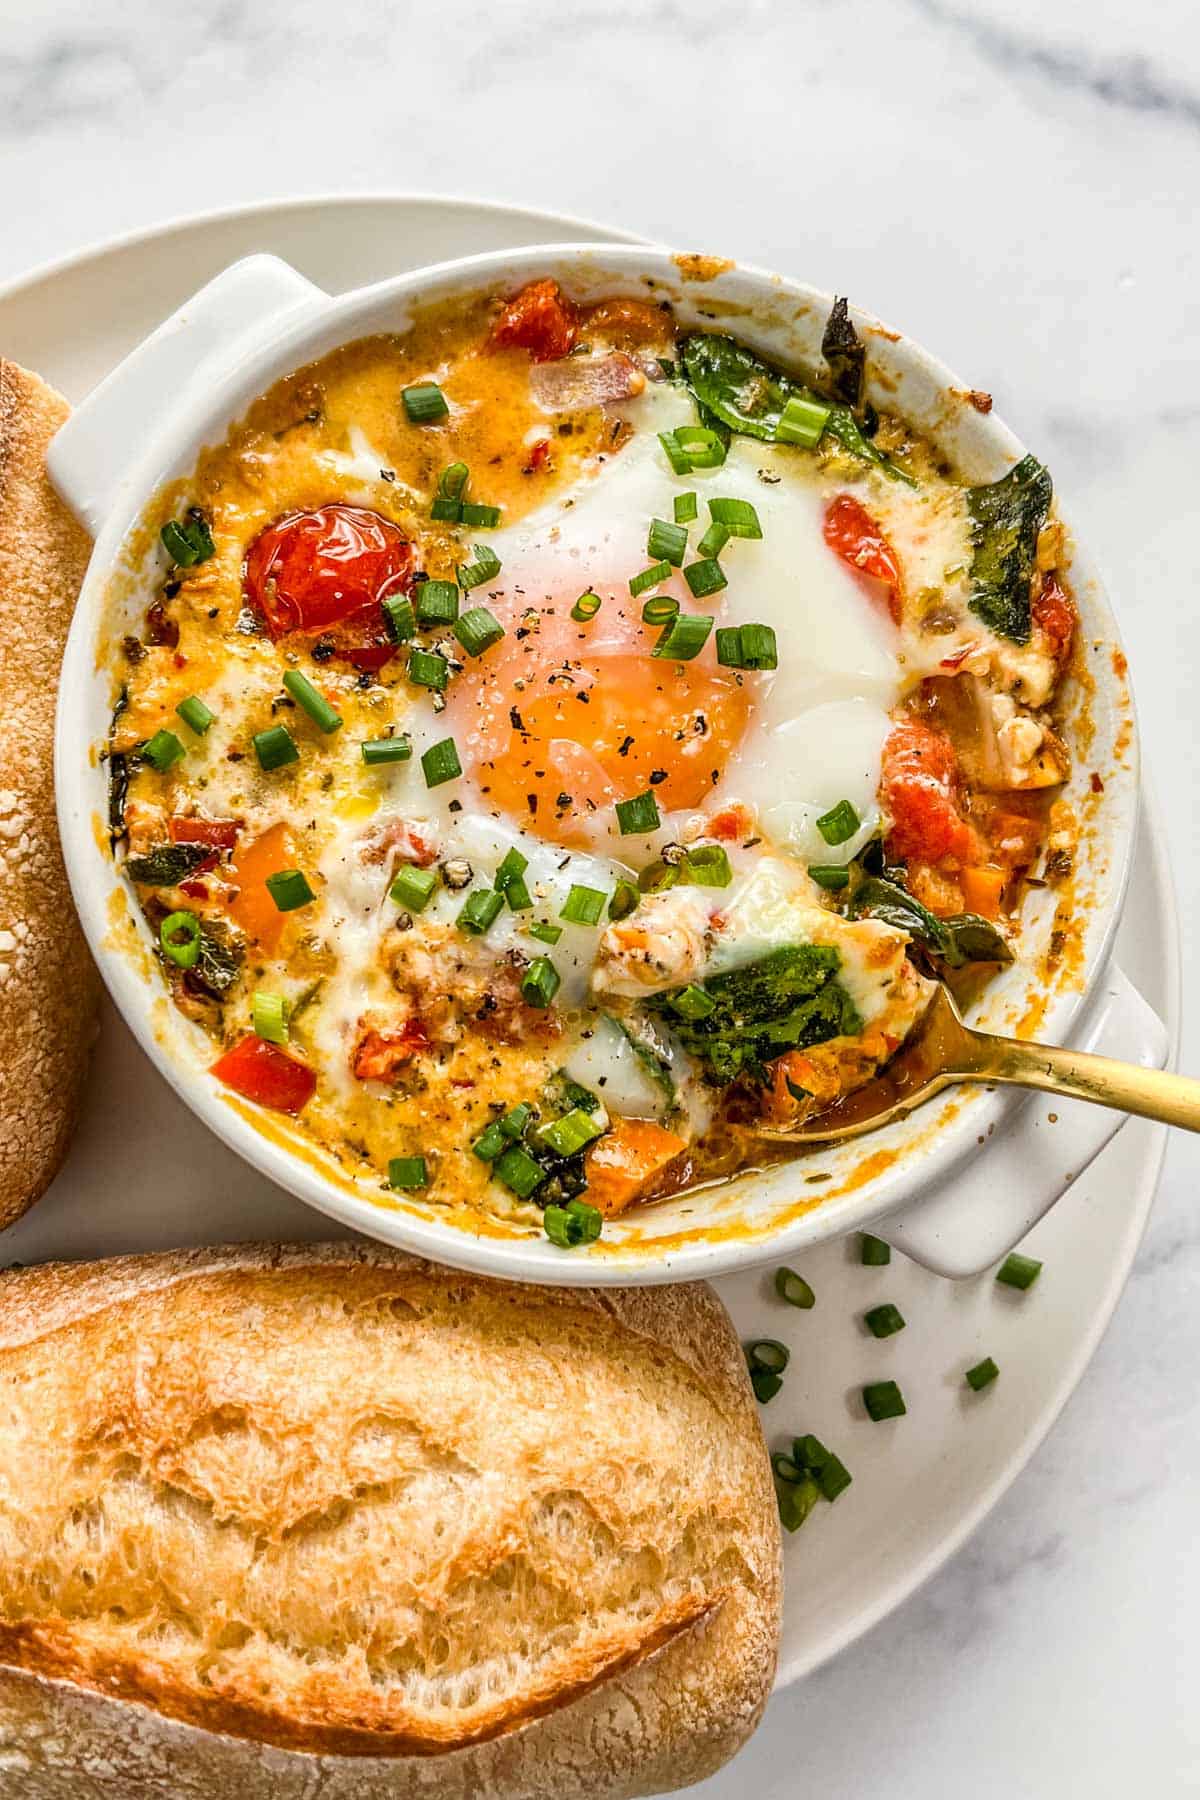 Baked feta eggs with spinach and tomatoes in a small ramekin with a gold spoon on a white plate with bread.